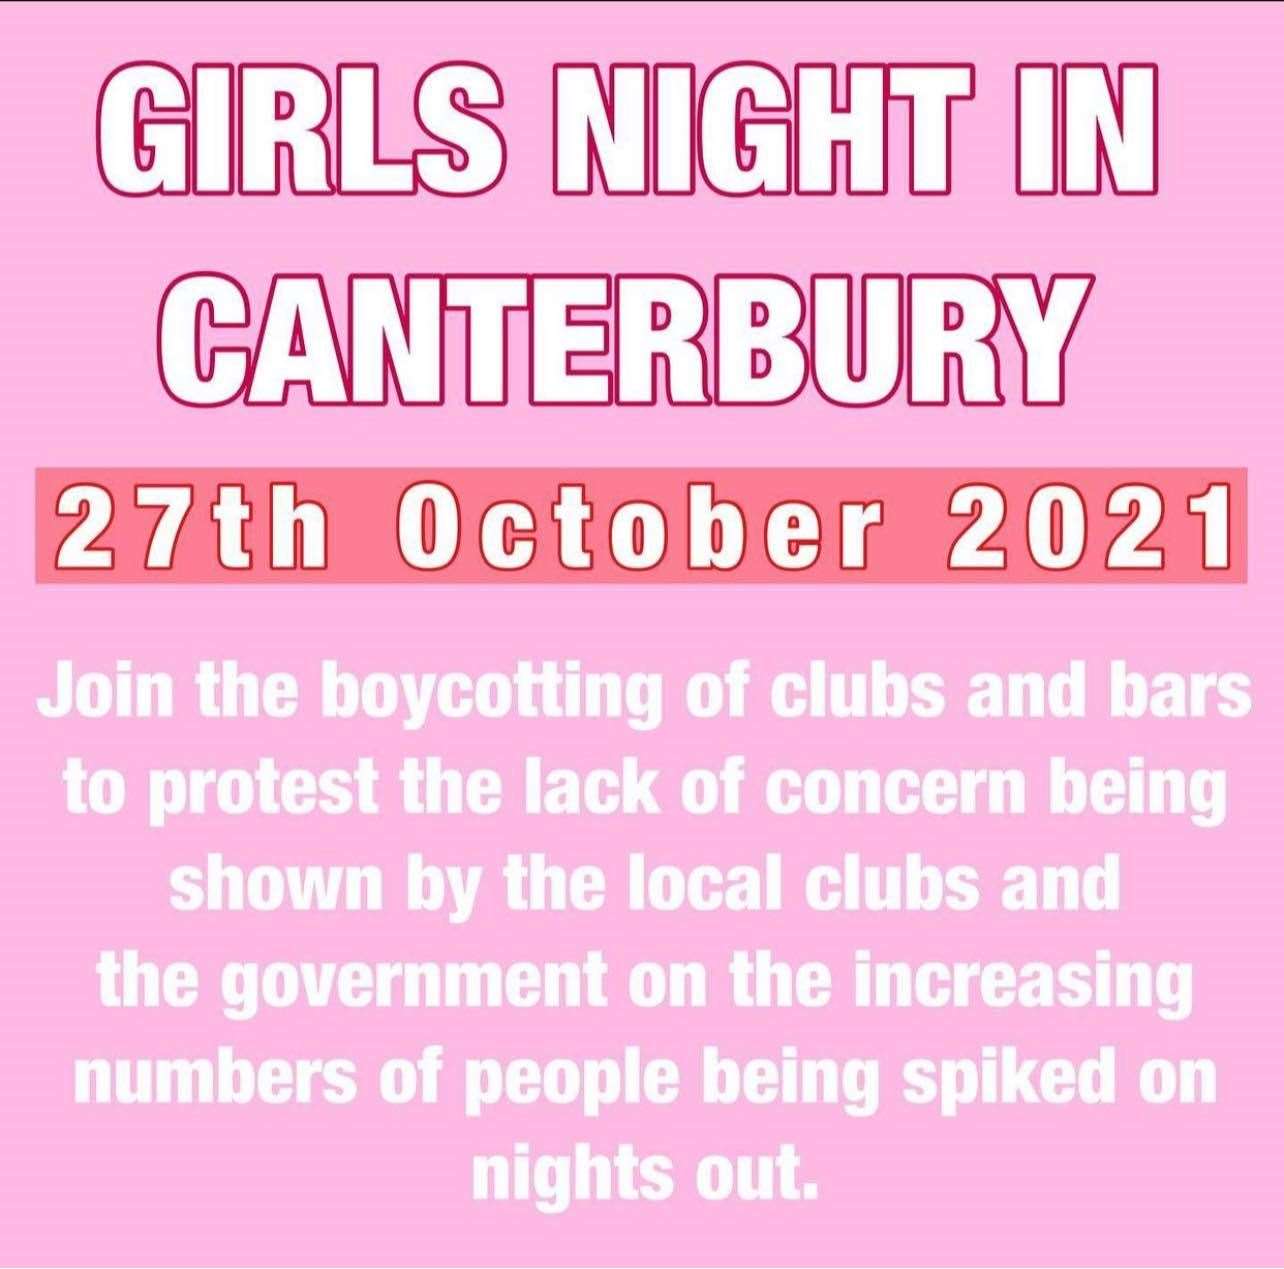 The anti-spiking campaign Girls Night In have prompted a boycott in Canterbury